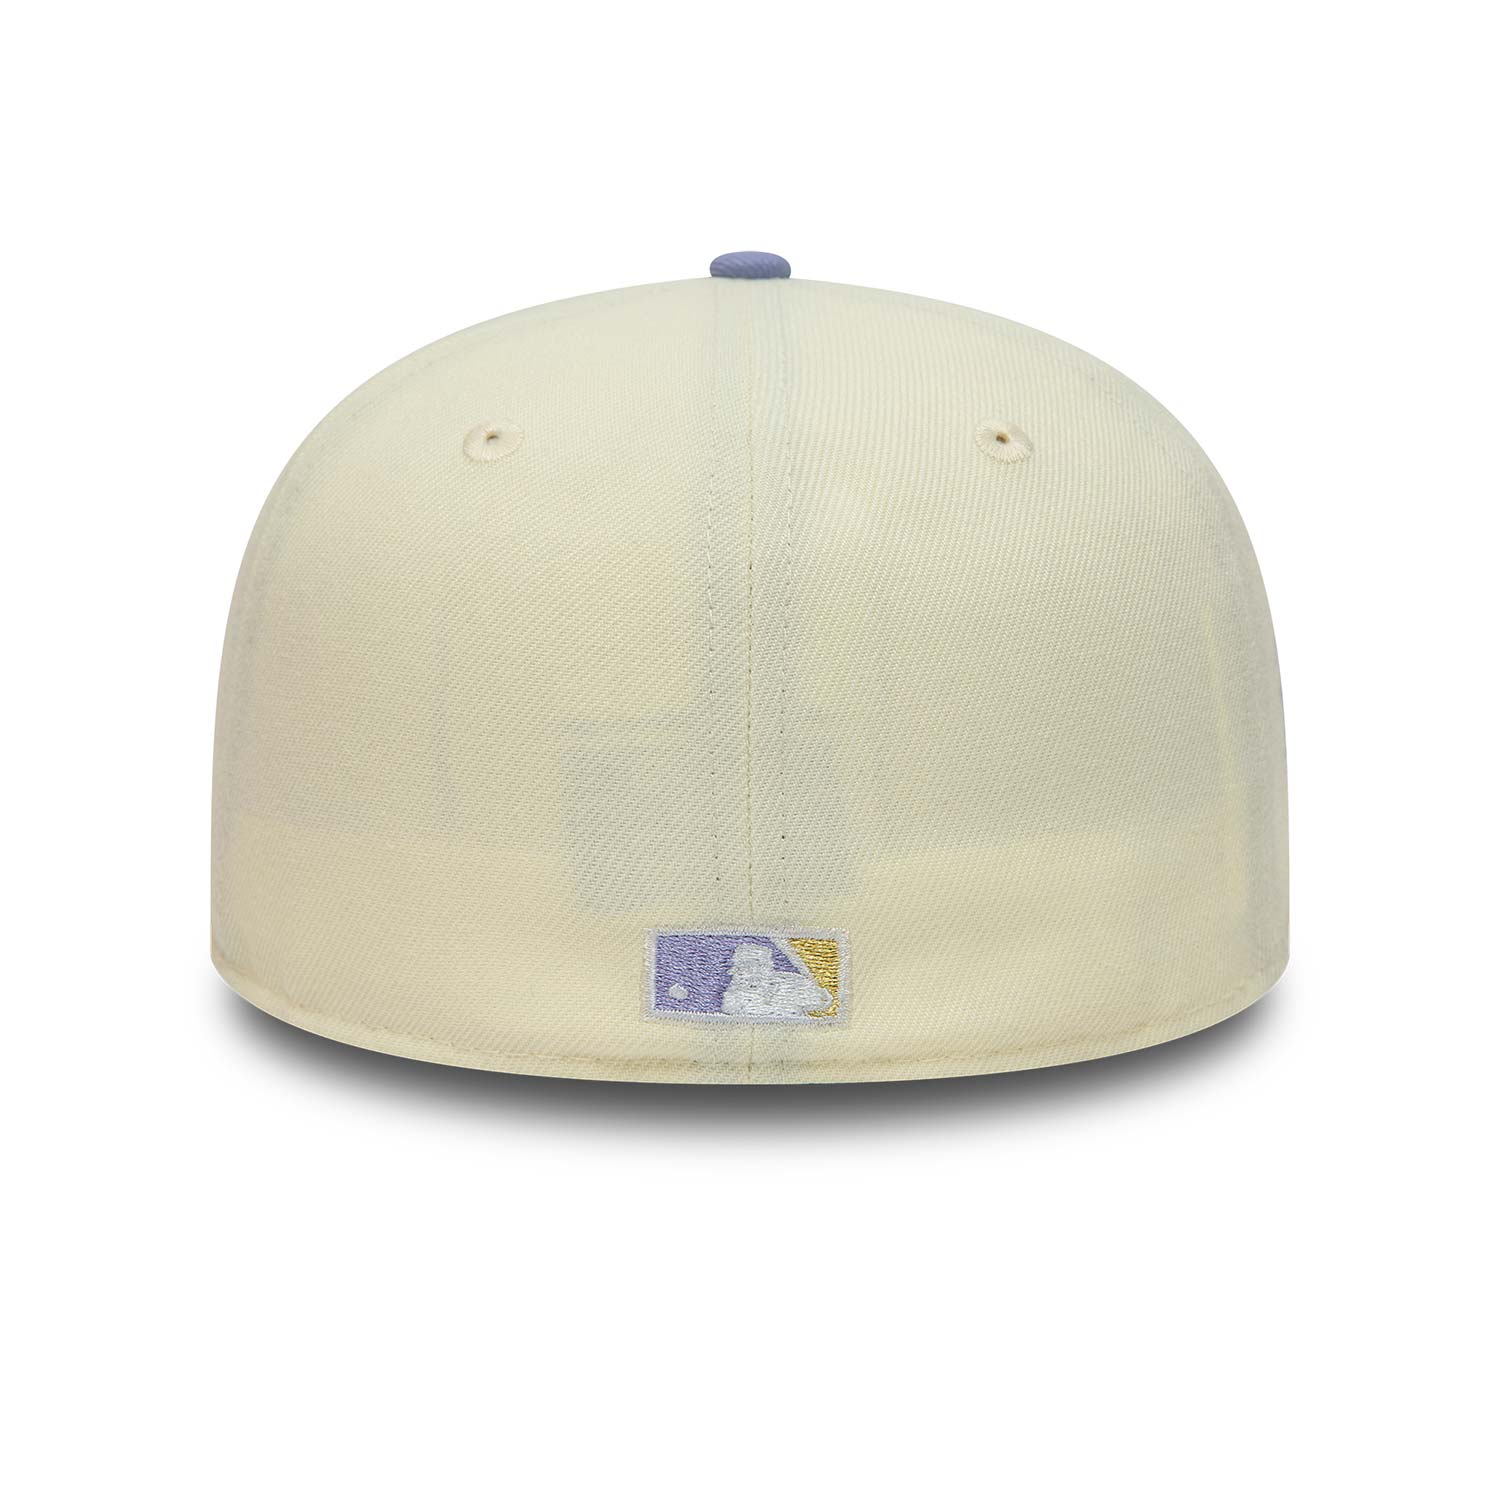 New York Yankees Chrome and Pastel 59FIFTY Fitted Cap